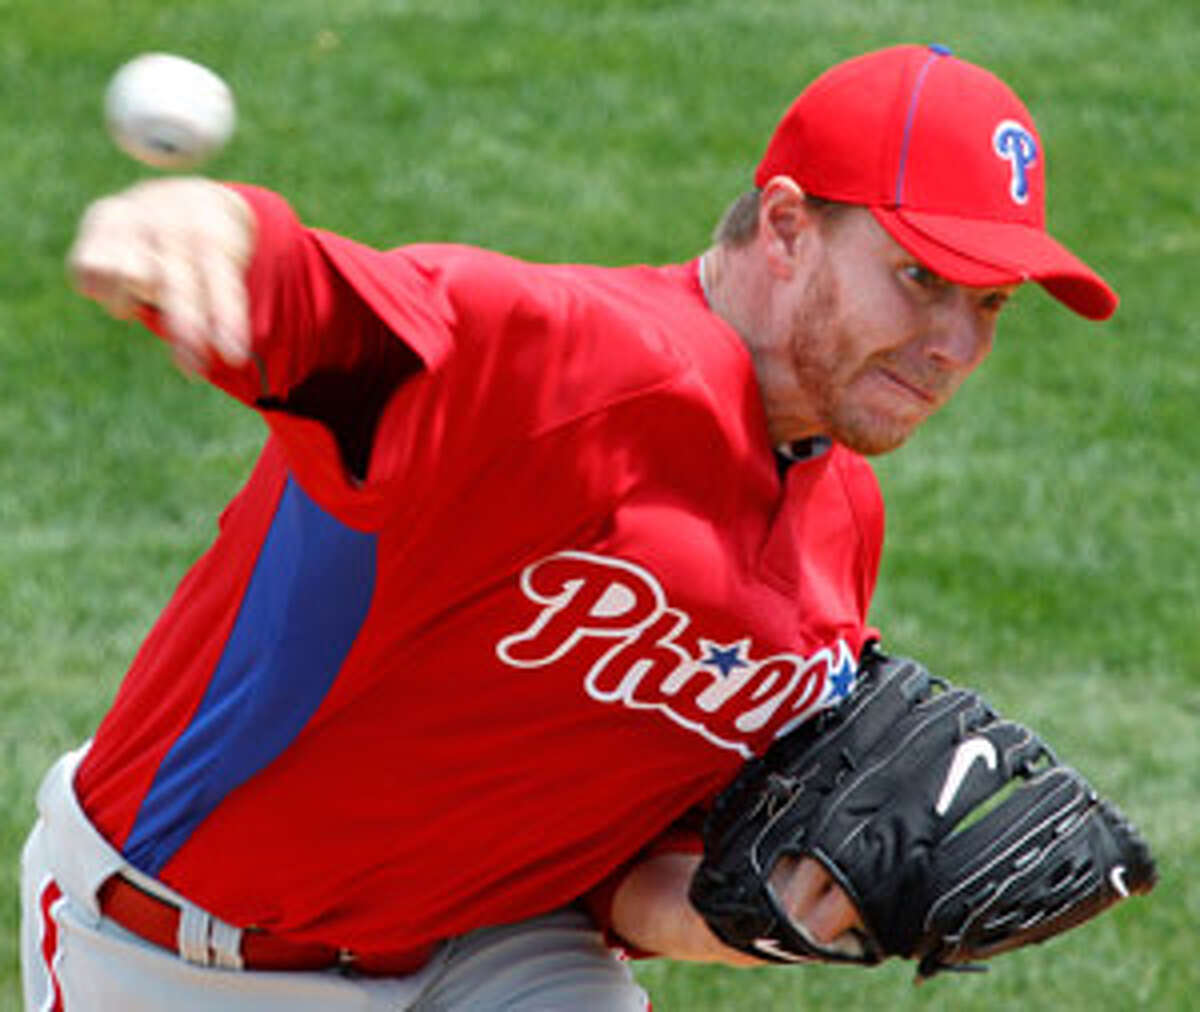 Phillies ace Roy Halladay, shown March 15, has a 2.40 ERA this spring after a 3-0 loss to Detroit on Saturday.